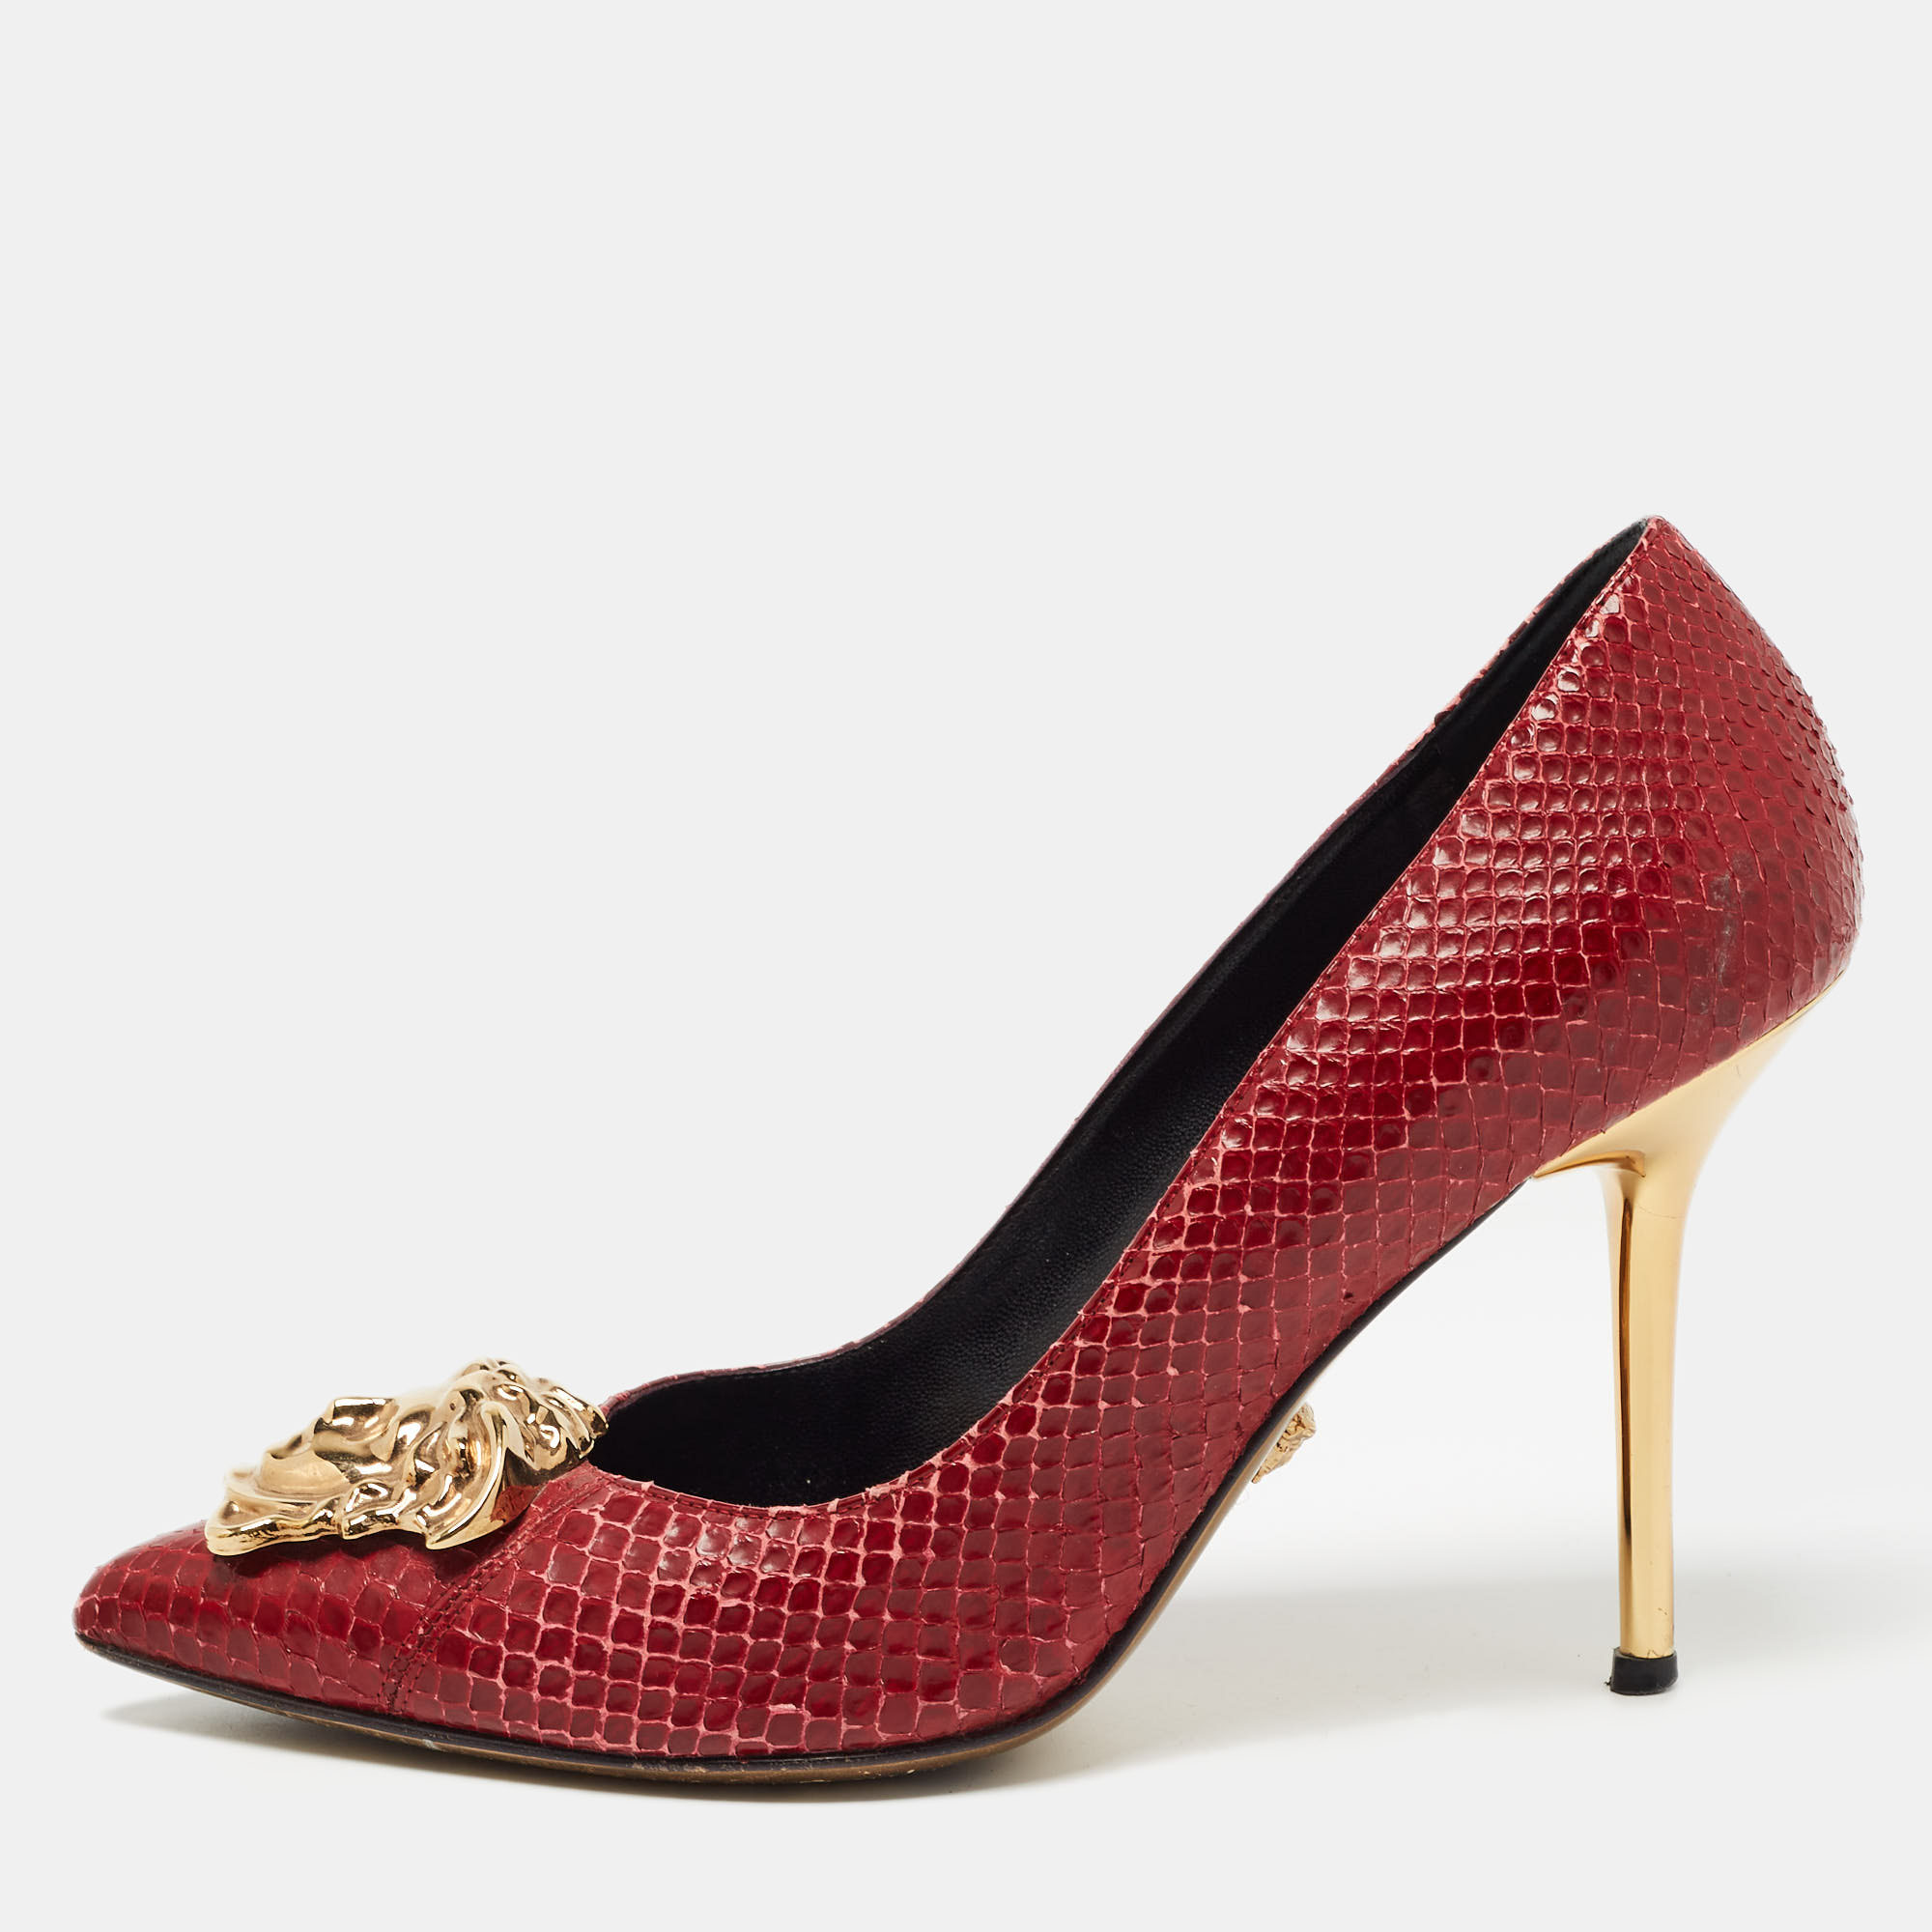 This pair of Versace pumps are a style statement with a timeless design. Crafted from python leather they feature pointed toes accented with the iconic Medusa motif in gold tone metal 10cm heels and leather soles. They bring a touch of glamour to every outfit they are paired with.